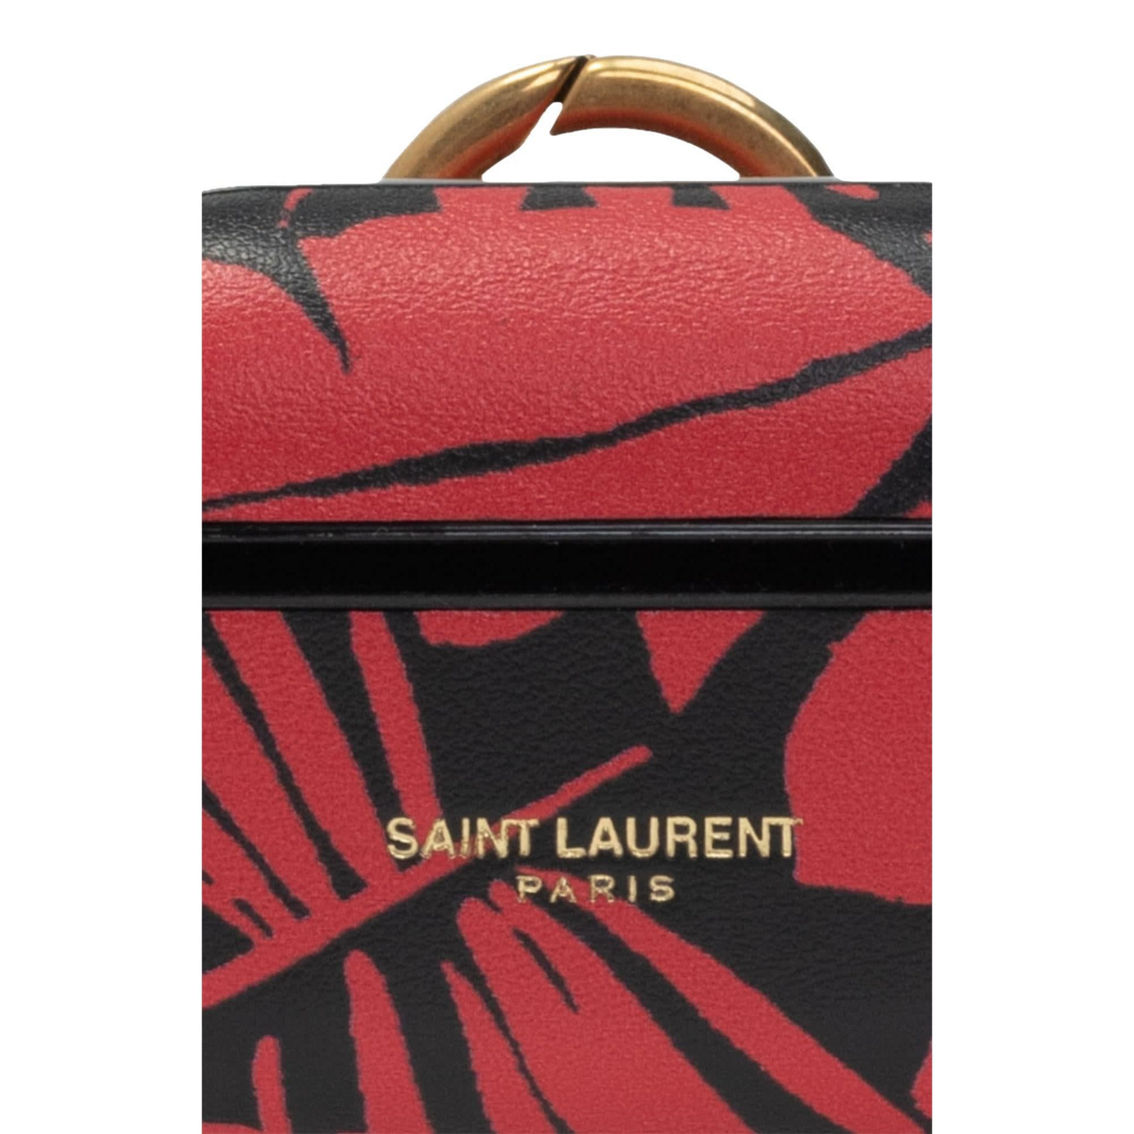 Saint Laurent Abstract Print Black and Red Leather Airpods Pro Case (New) - Image 2 of 4